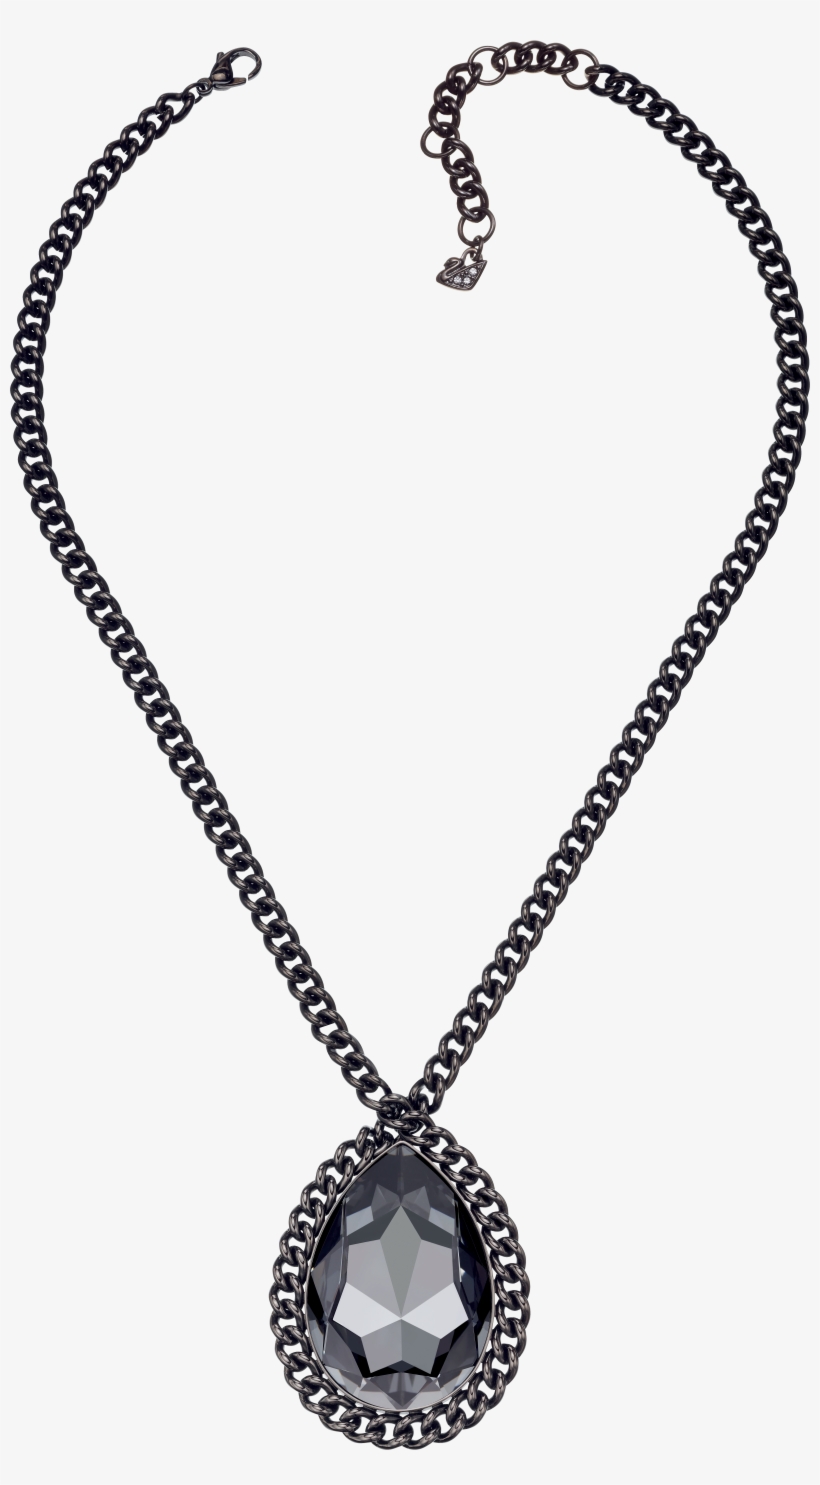 Silver Necklace Chain, transparent png #4115117